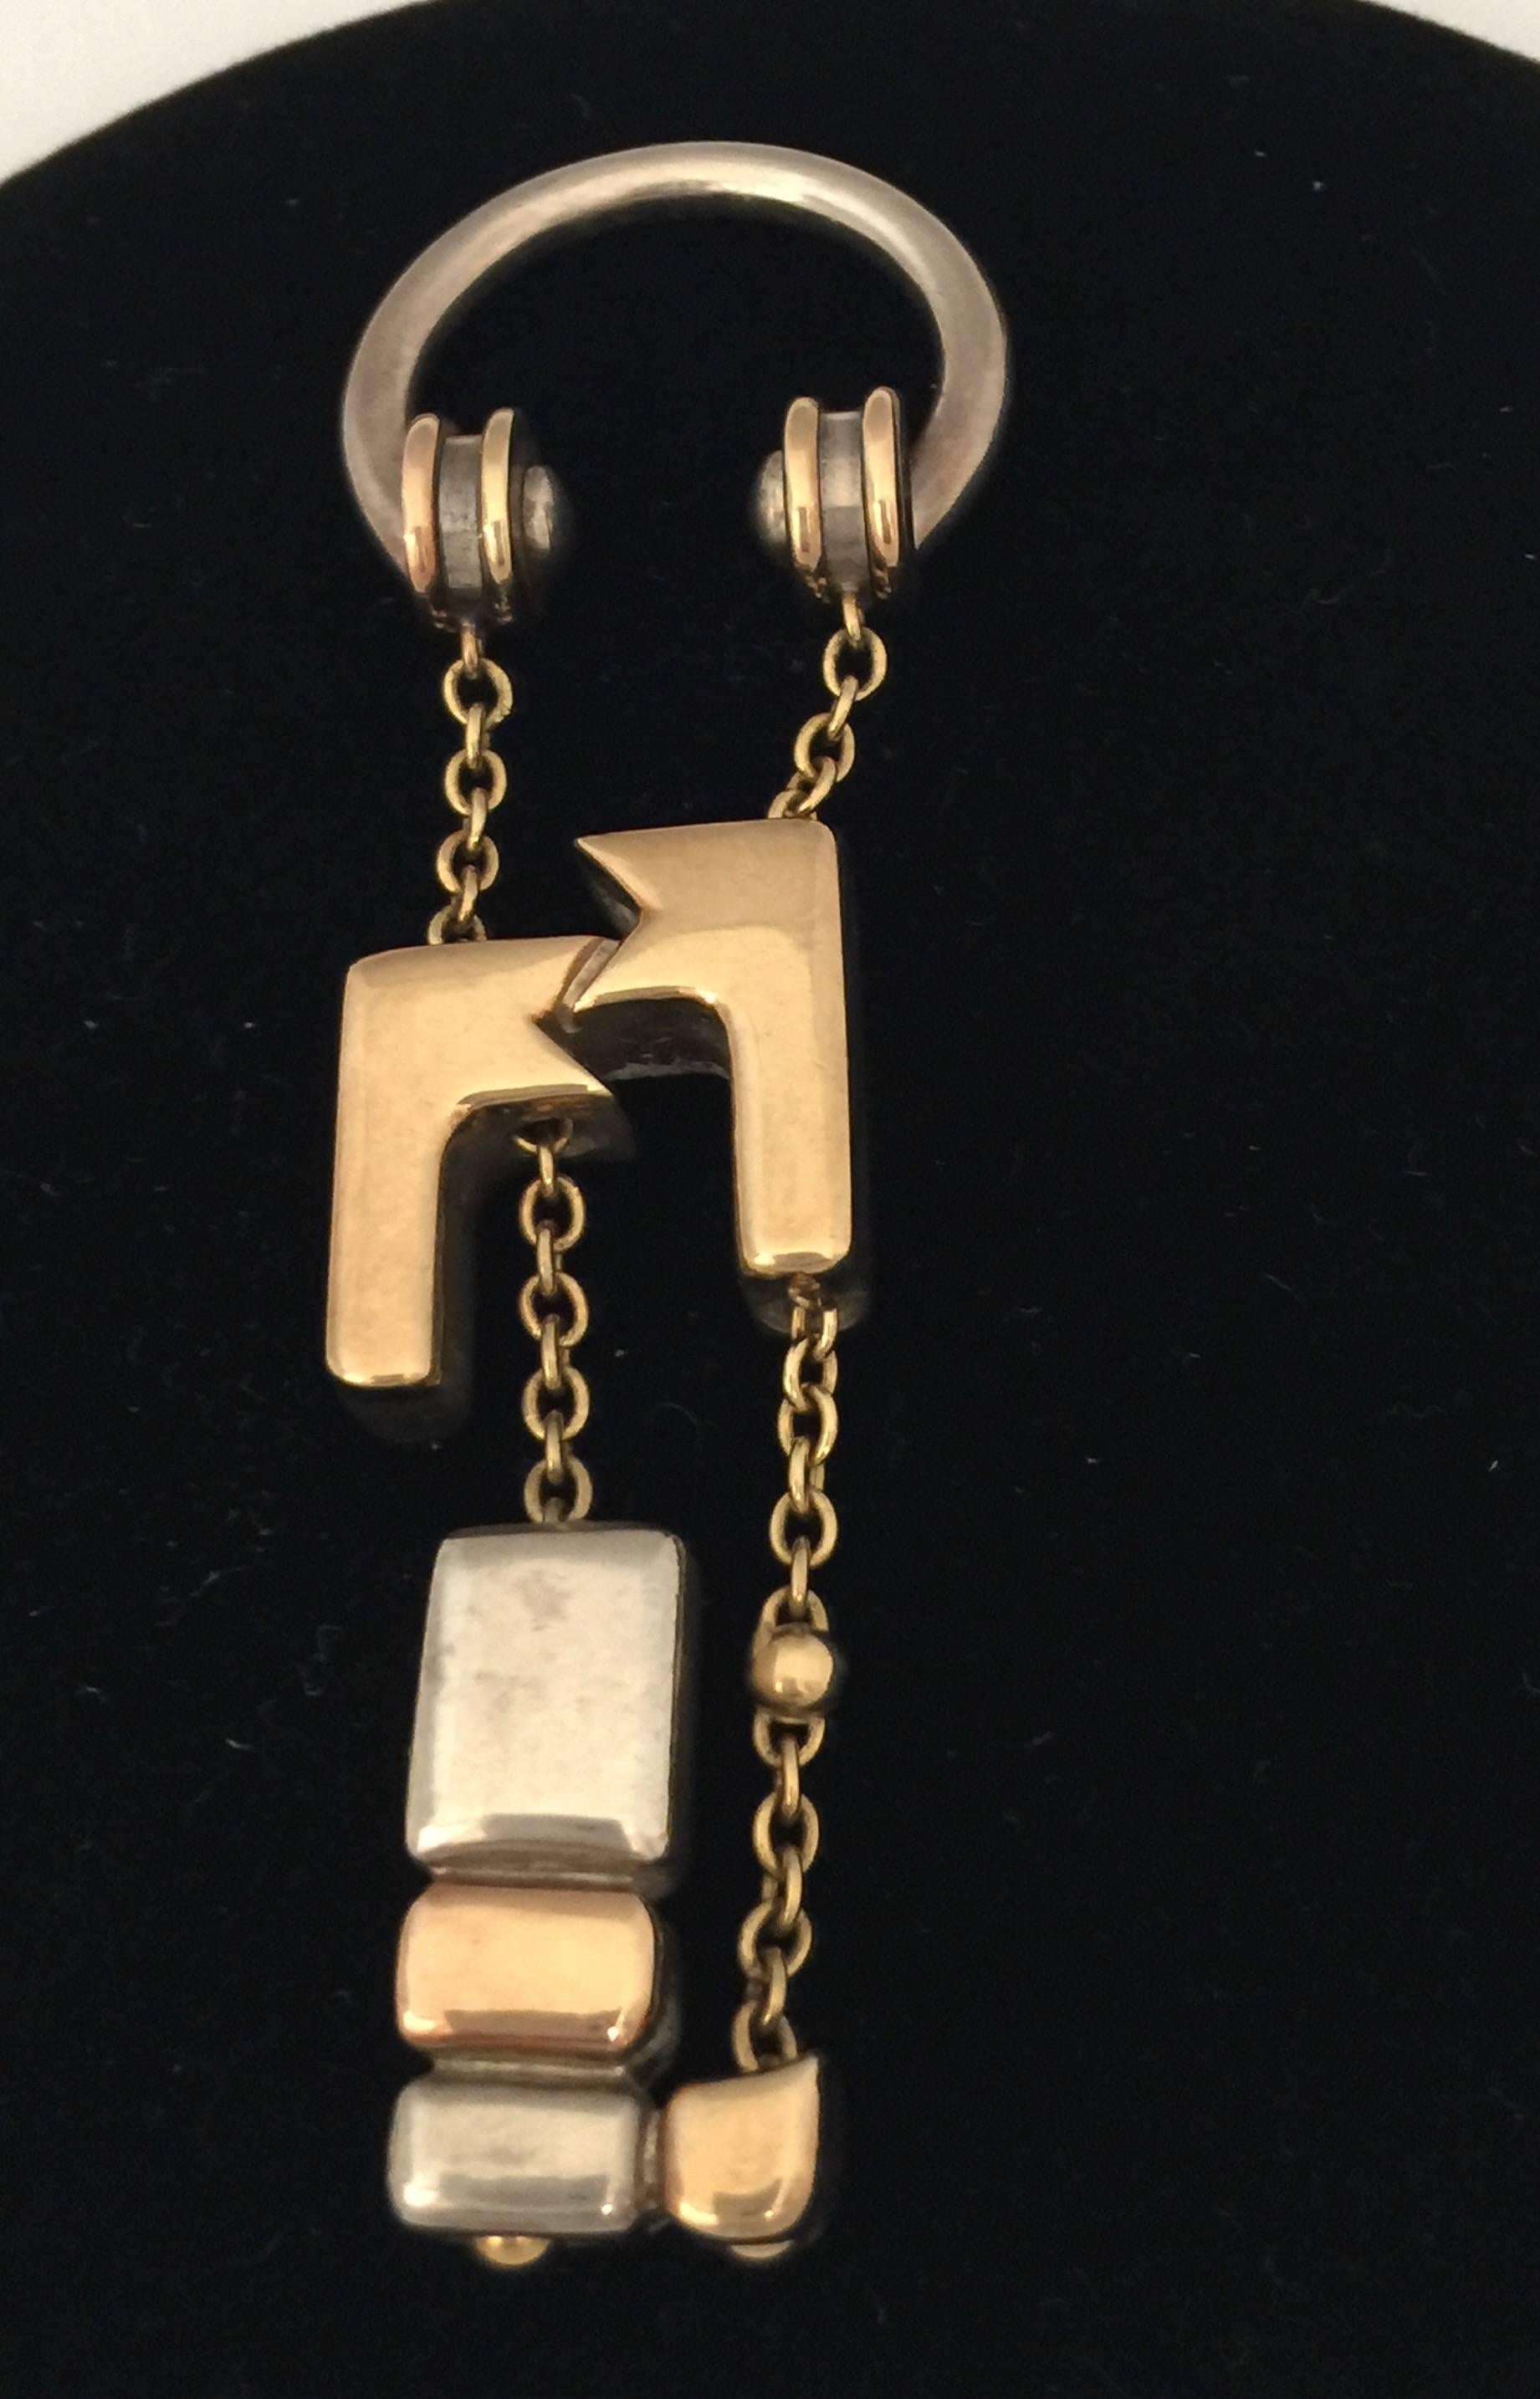 A superb, highly sculptural cubist keyring composed of an abstracted intertwined double panther fob - the facing heads of 18k gold, the intertwining bodies of gold and silver -  suspended by a gold chain from a sterling sliver horseshoe screw ring